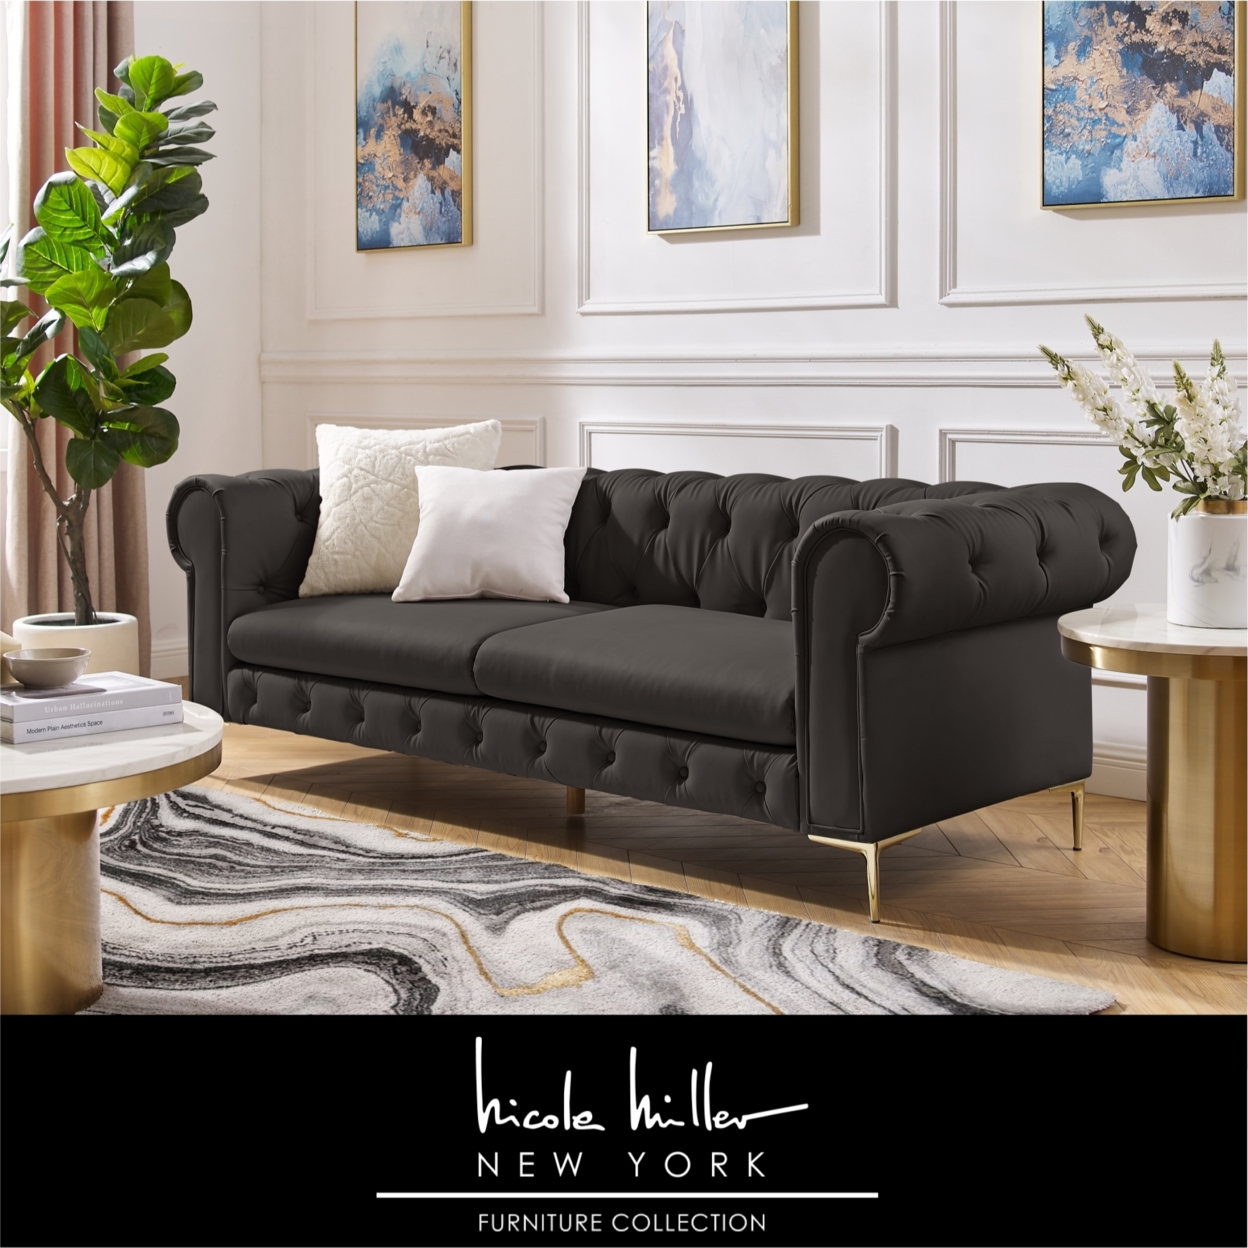 Laci Sofa - Button Tufted, 3 Seat - Rolled Arms - Y Leg, Sinuous Springs - Camel